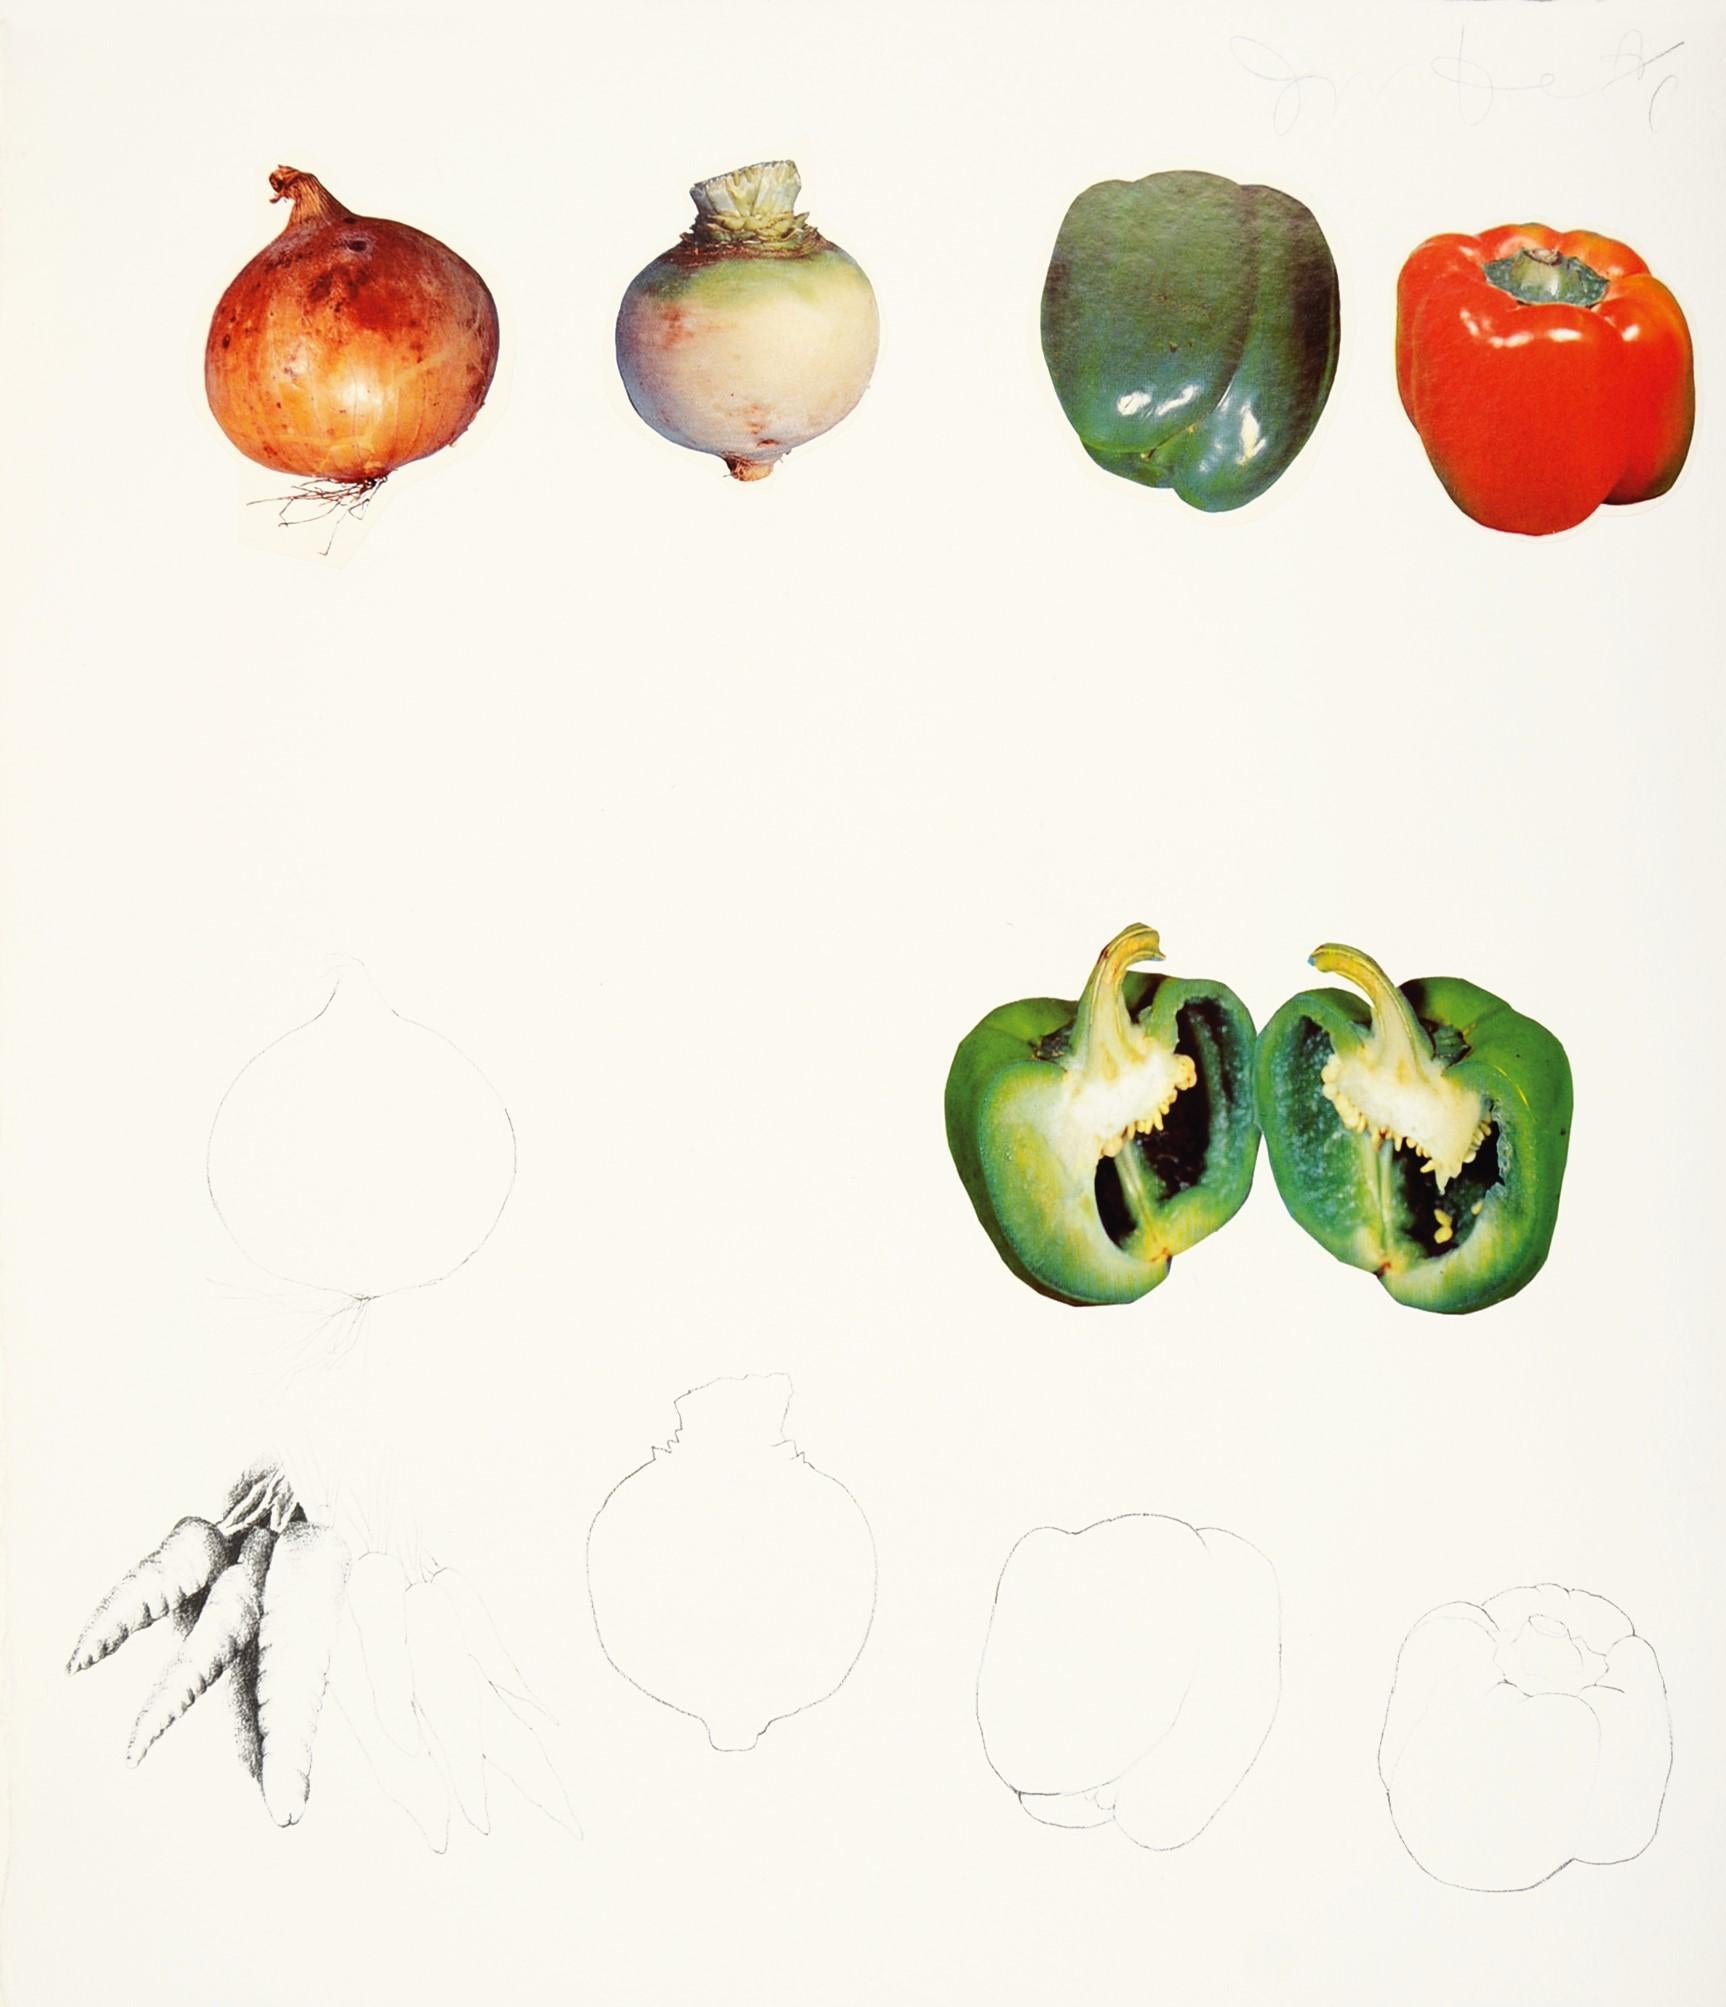 lithograph with collage in colours, on Hodgkinson handmade paper, 1970, signed and inscribed 'A/P' in pencil one of 12 artist's proof sets, the edition was 96), published by Petersburg Press, New York, 47.7 x 43 cm